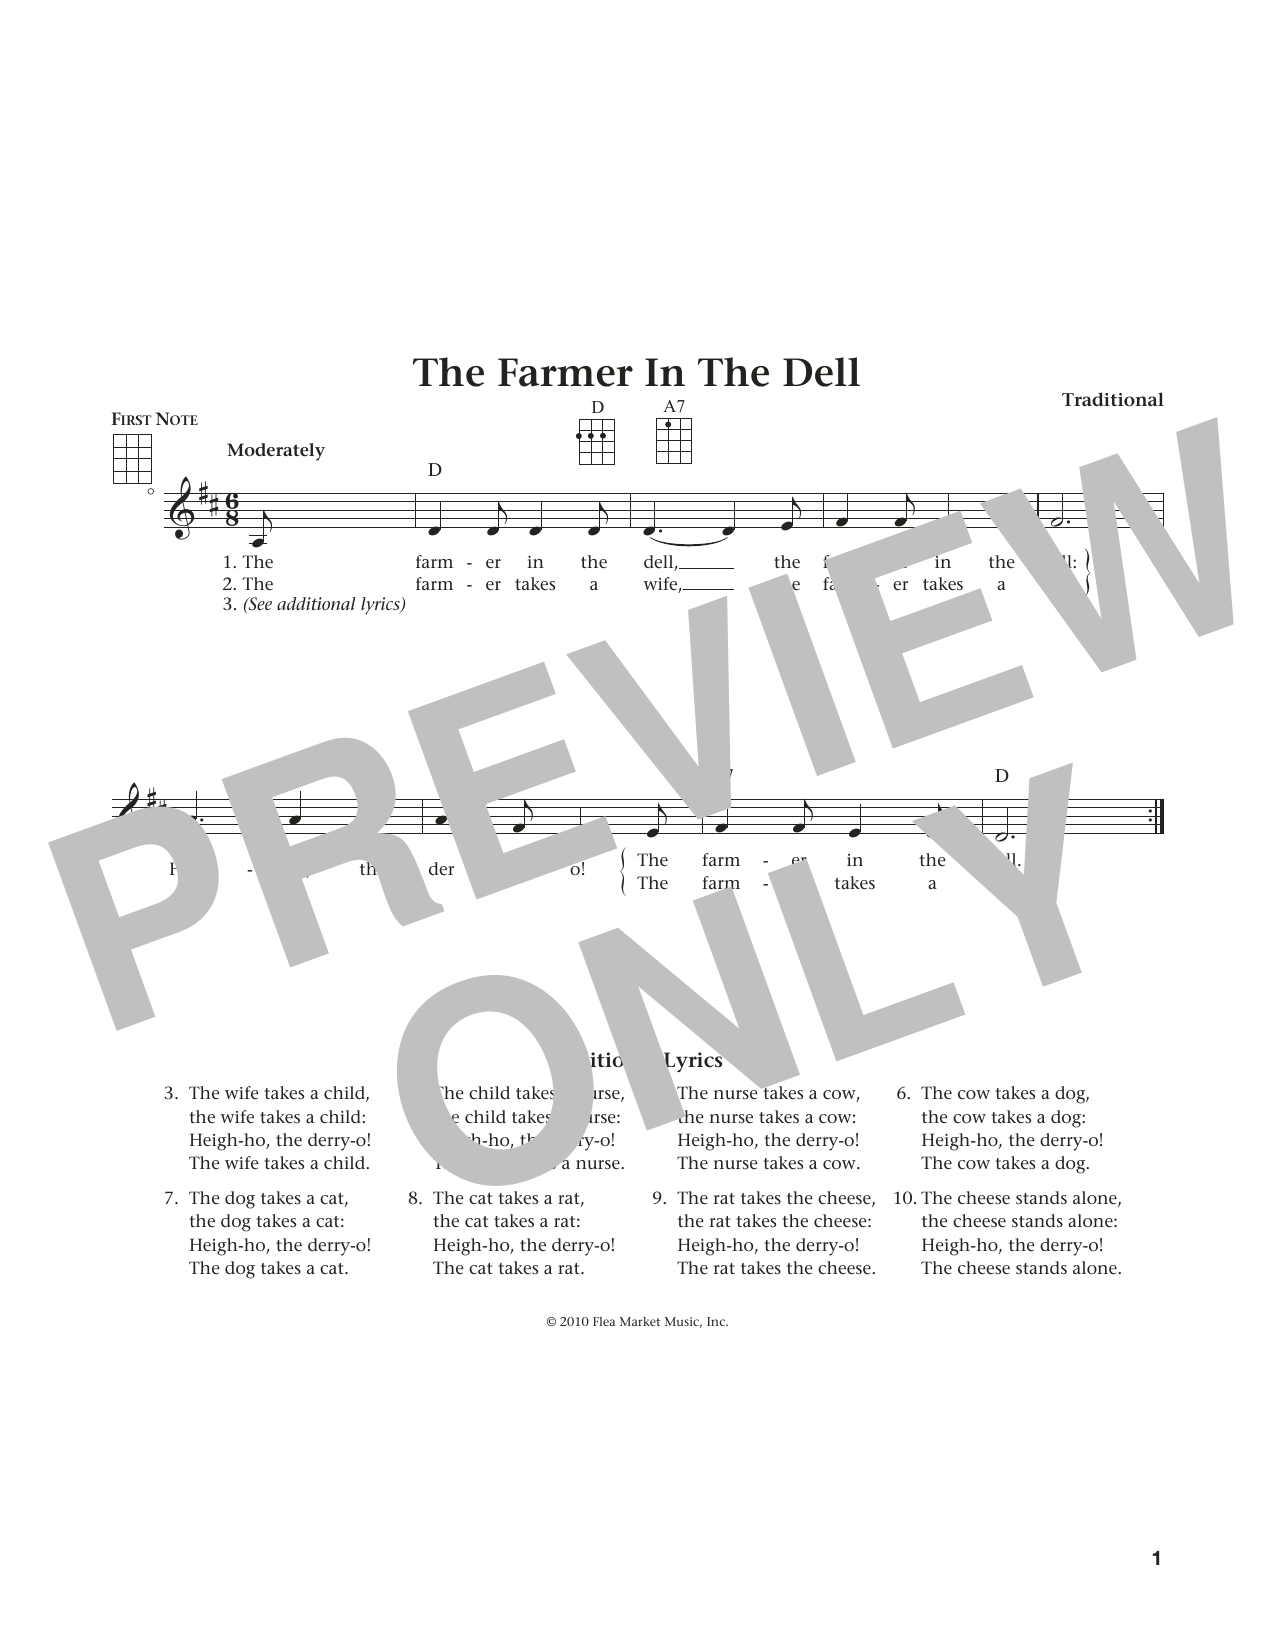 Download Traditional The Farmer In The Dell (from The Daily Sheet Music